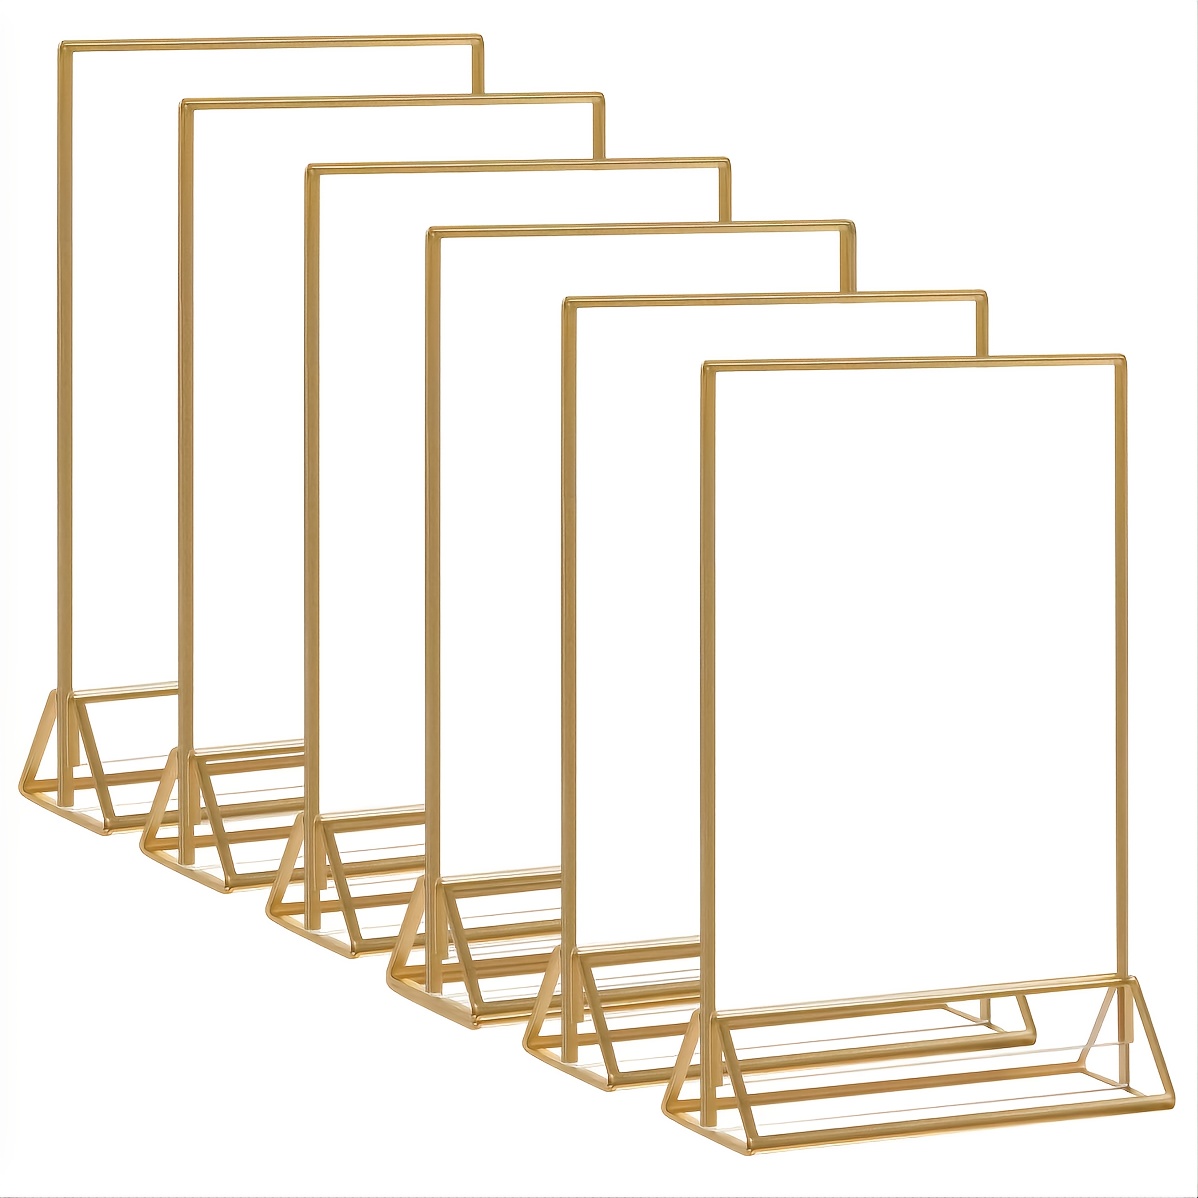 Acrylic Clear Sided Top Load Sign Holder 14W x 11H Inches Lot of 10 - 2